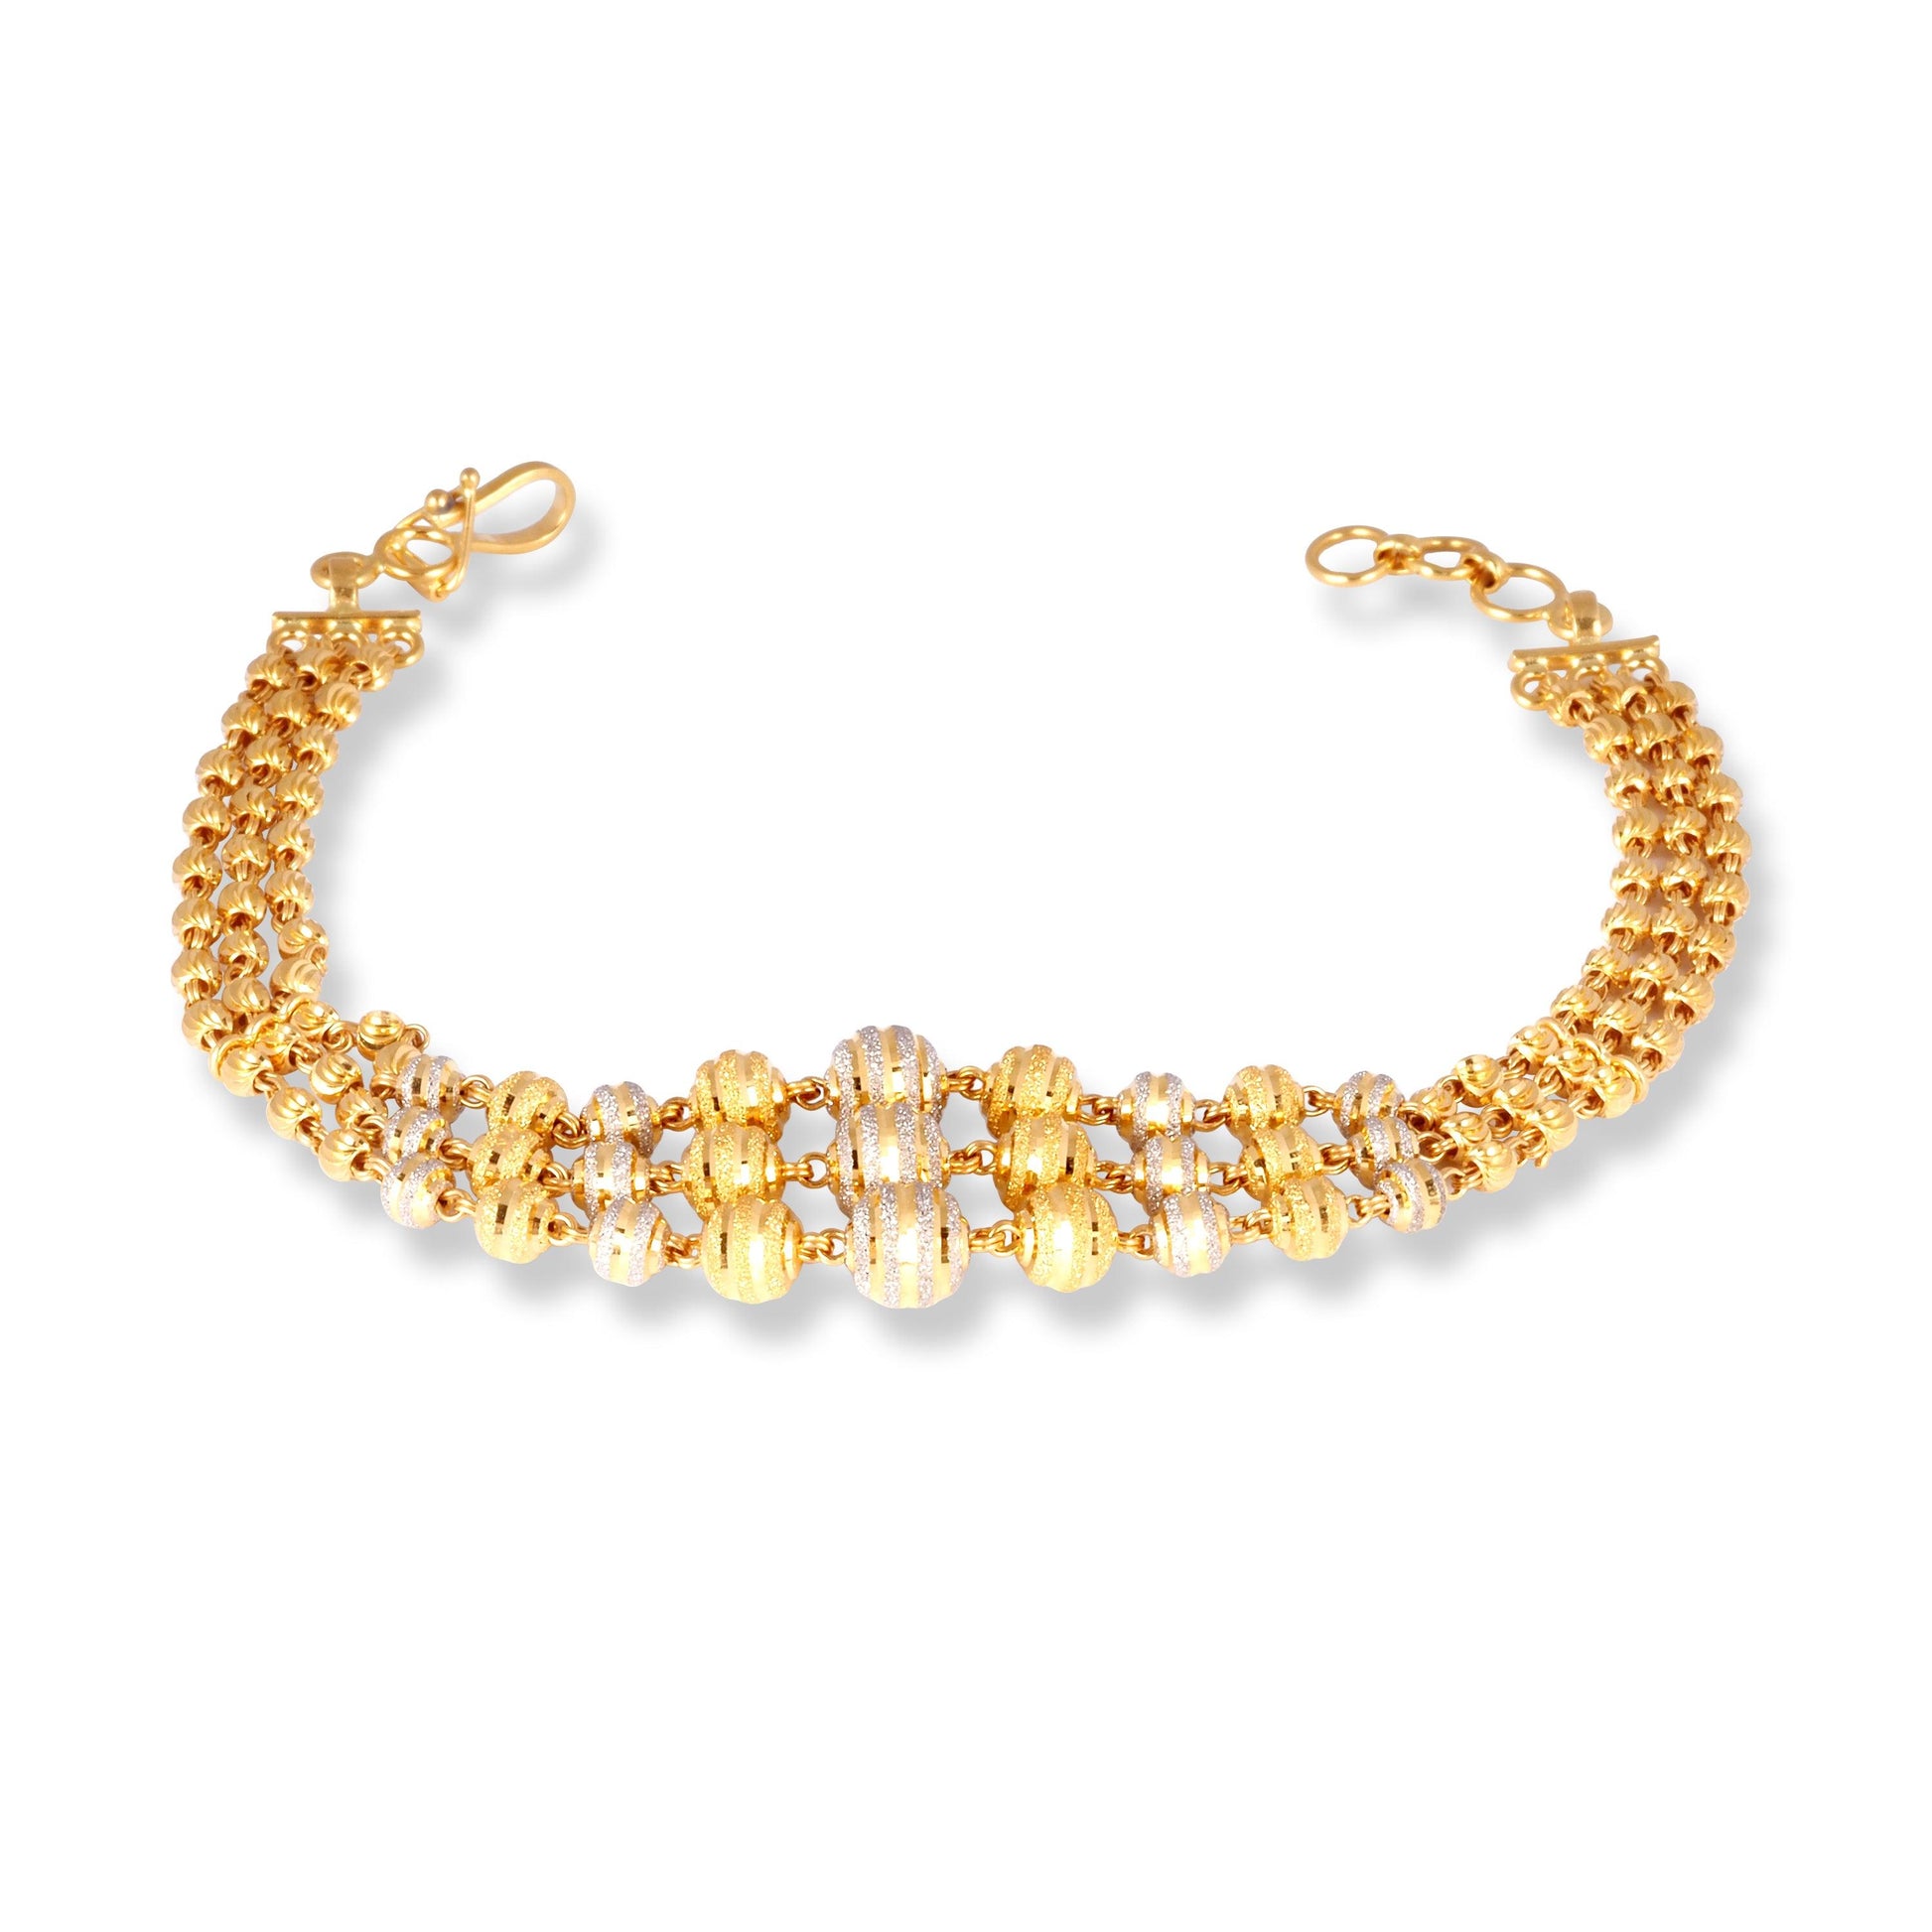 22ct Gold Three Row Ladies Bracelet with Rhodium Plated and Diamond Cut Beads & Hook Clasp LBR-7159 - Minar Jewellers